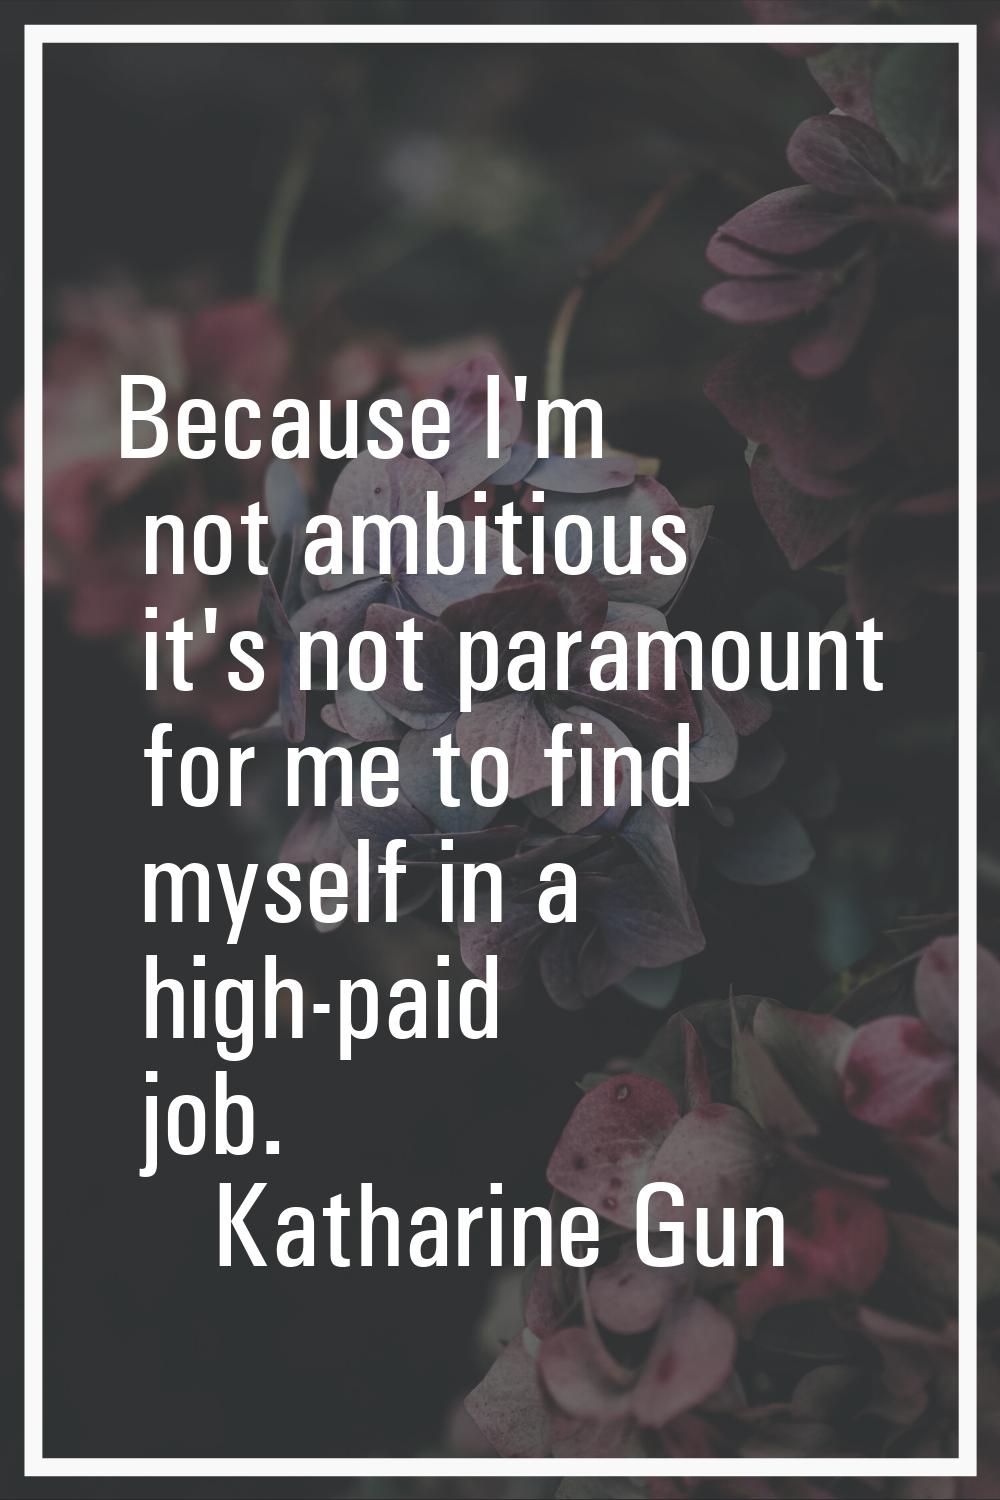 Because I'm not ambitious it's not paramount for me to find myself in a high-paid job.